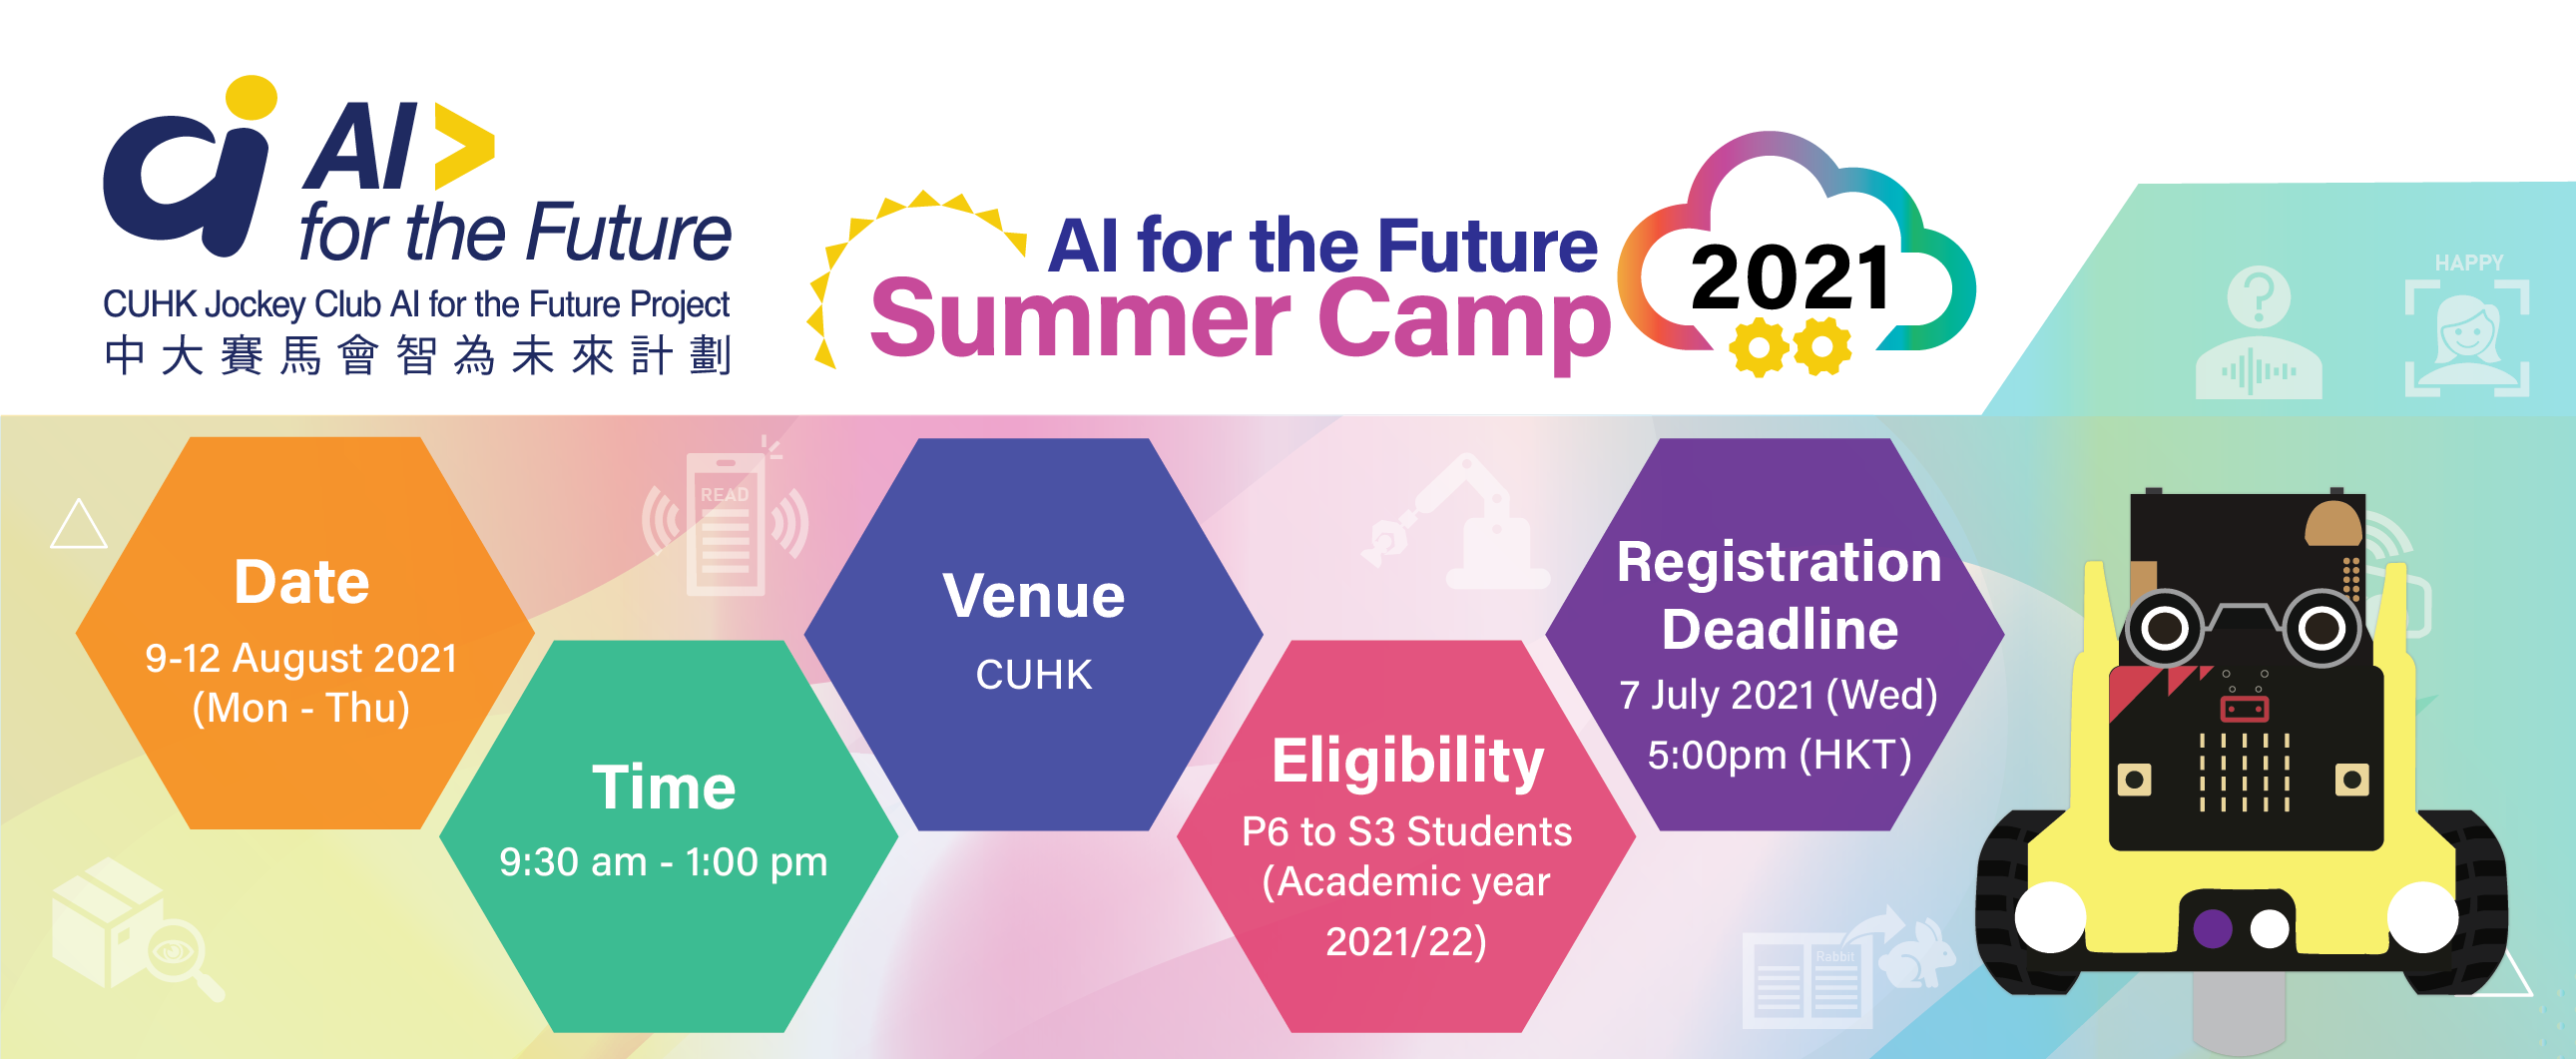 SummerCamp_Approved_Webpage Banner - Eng